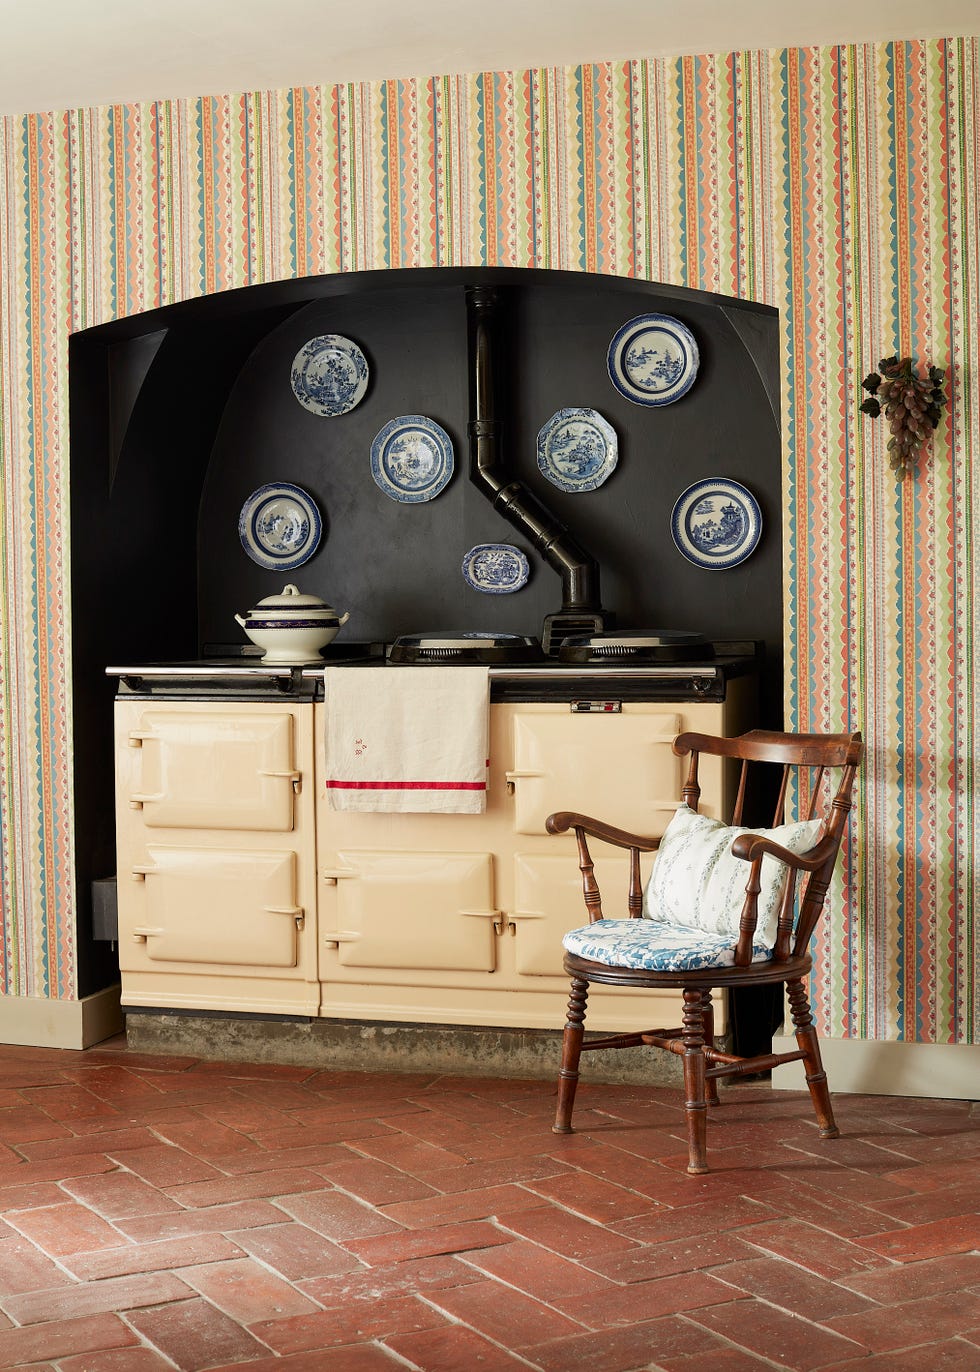 An AGA stove is placed in a black painted corner of the kitchen, and a plate is hung above it.